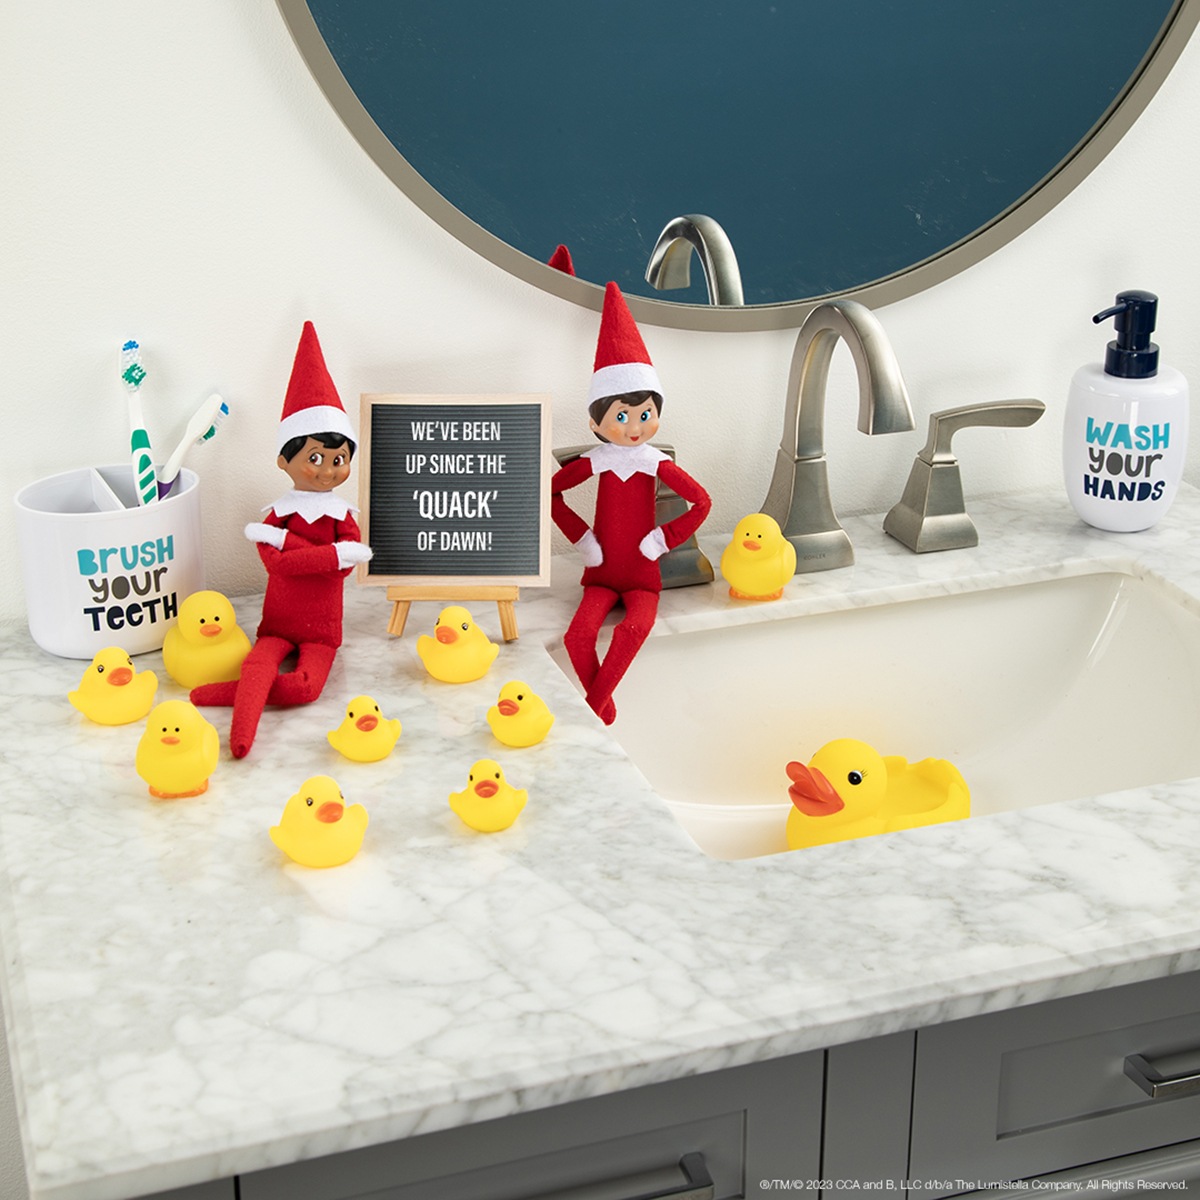 The Elf on the Shelf and friend sitting on a bathroom counter with rubber ducks and printable message card.